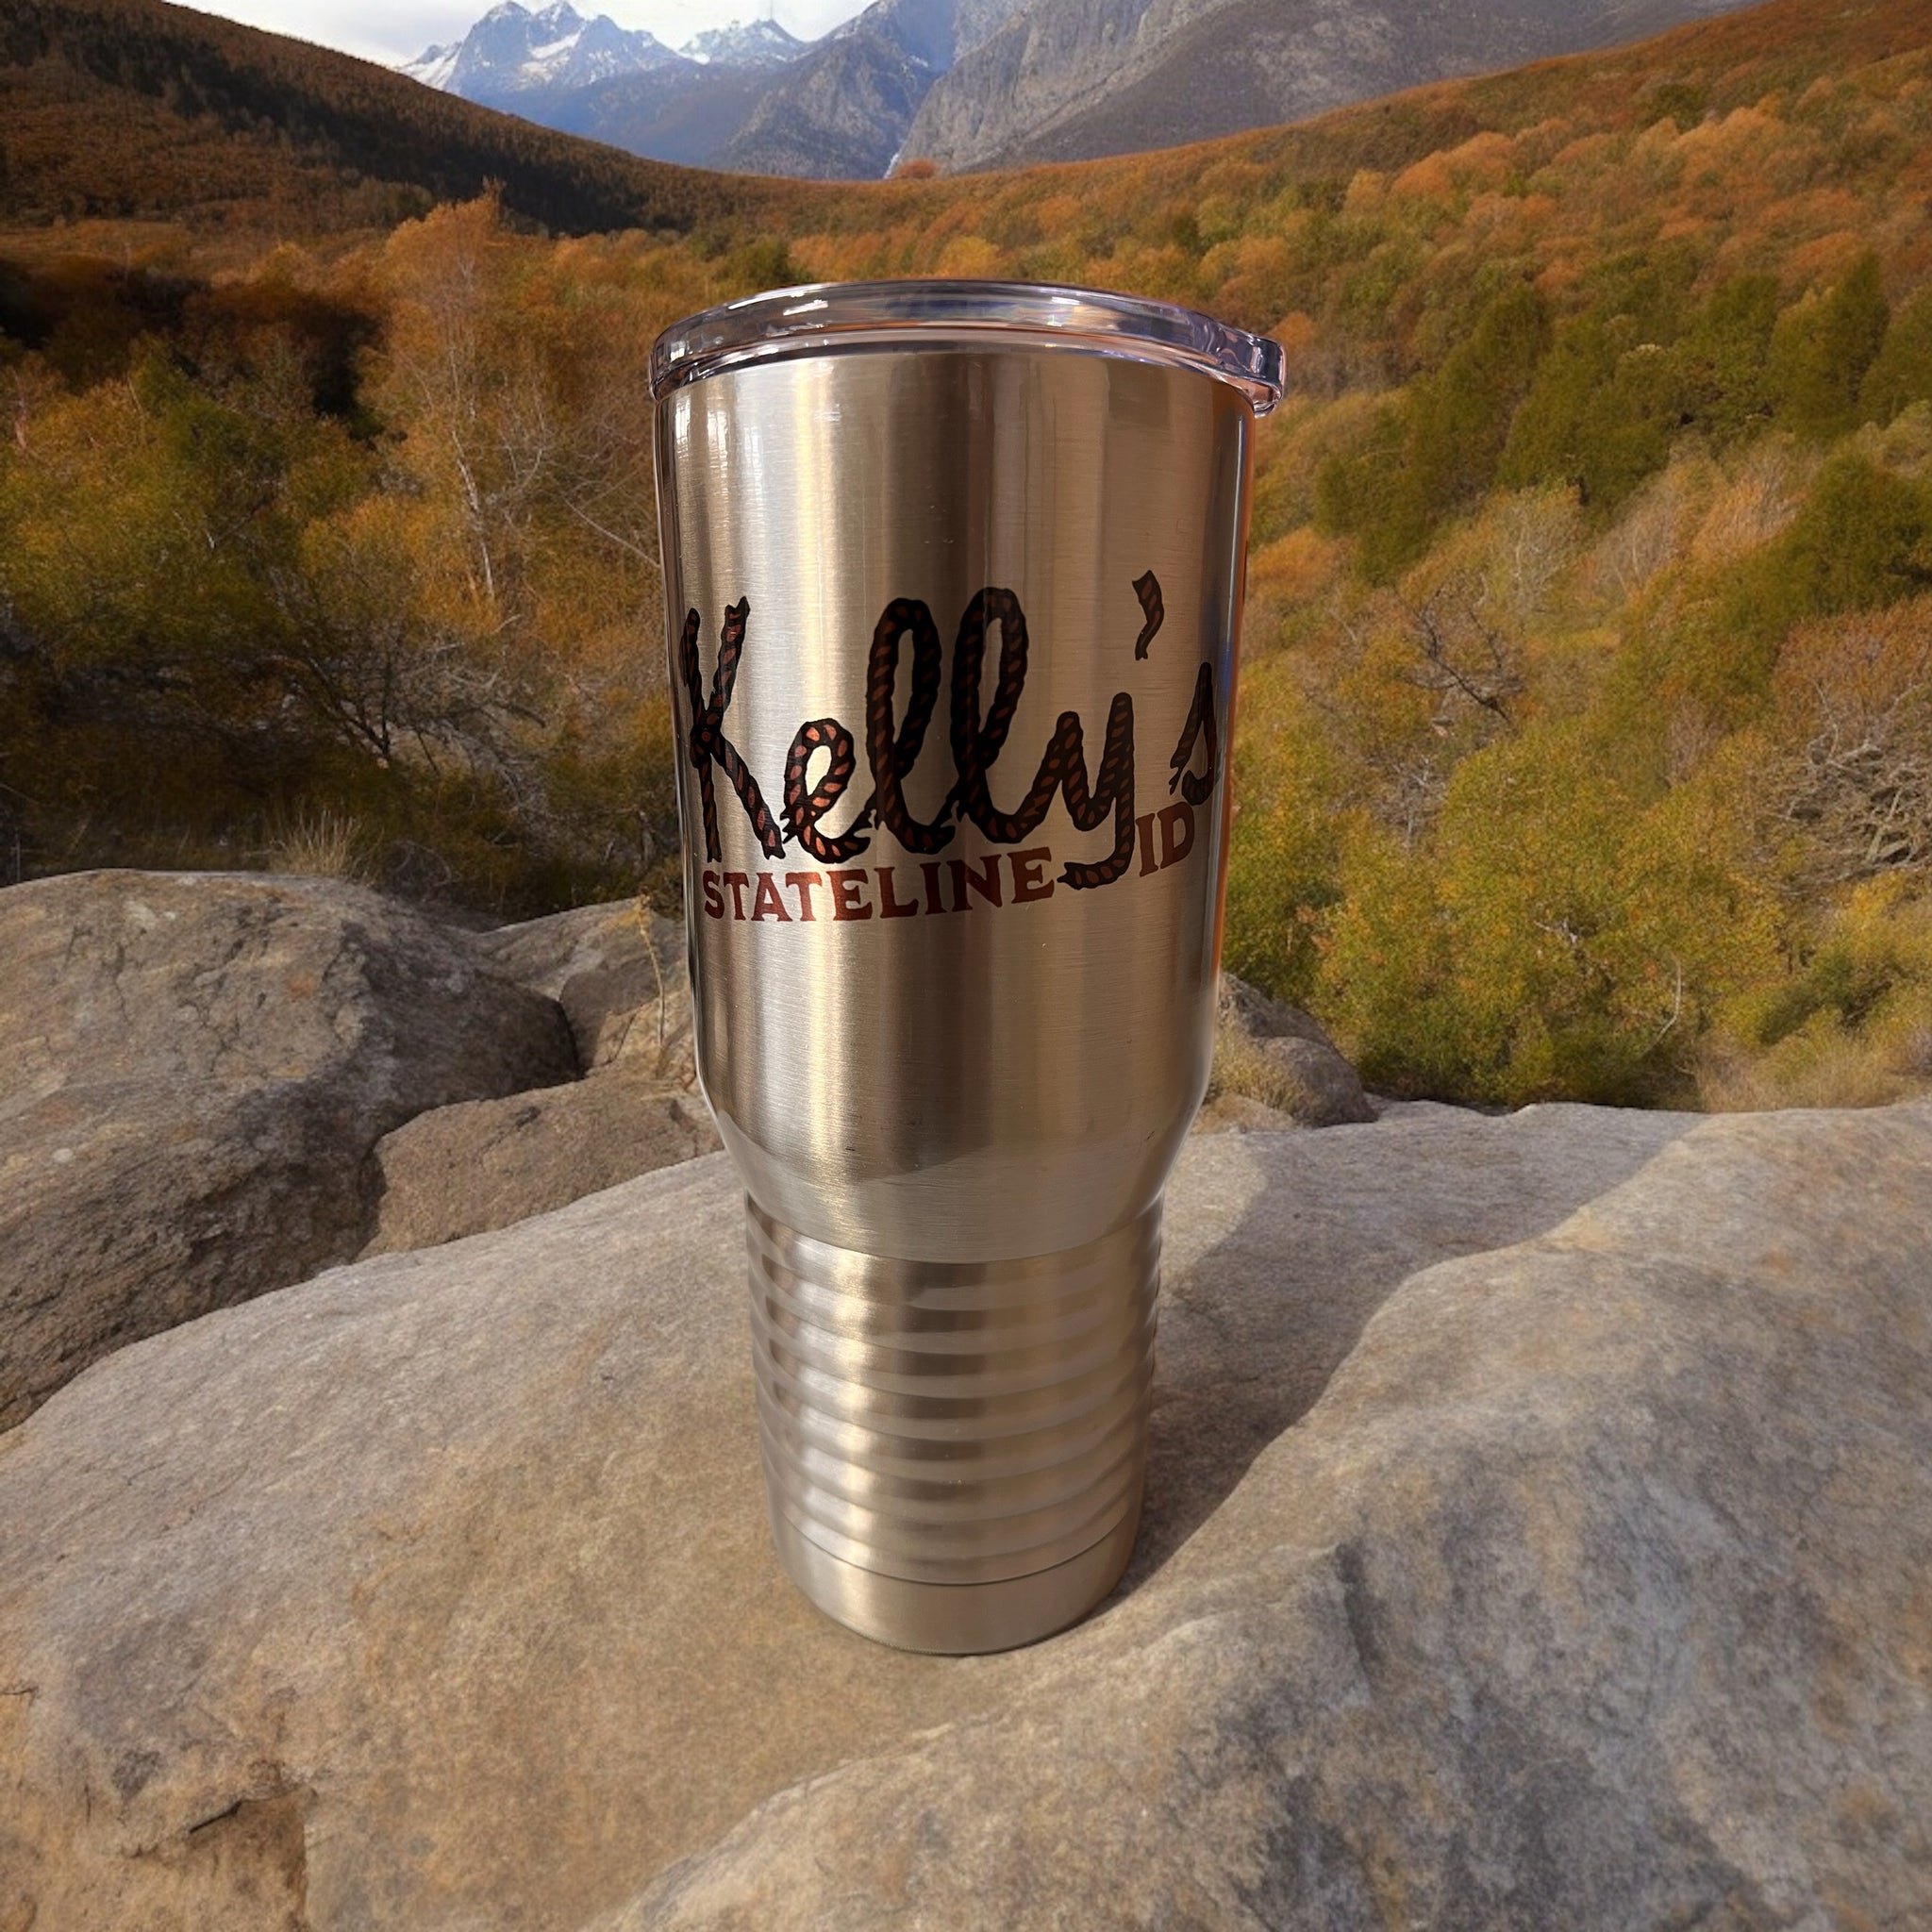  Kelly Hughes Band, Stateline Tumbler, stainless steel, double-wall insulation, spill-resistant lid, on-the-go, practical, stylish